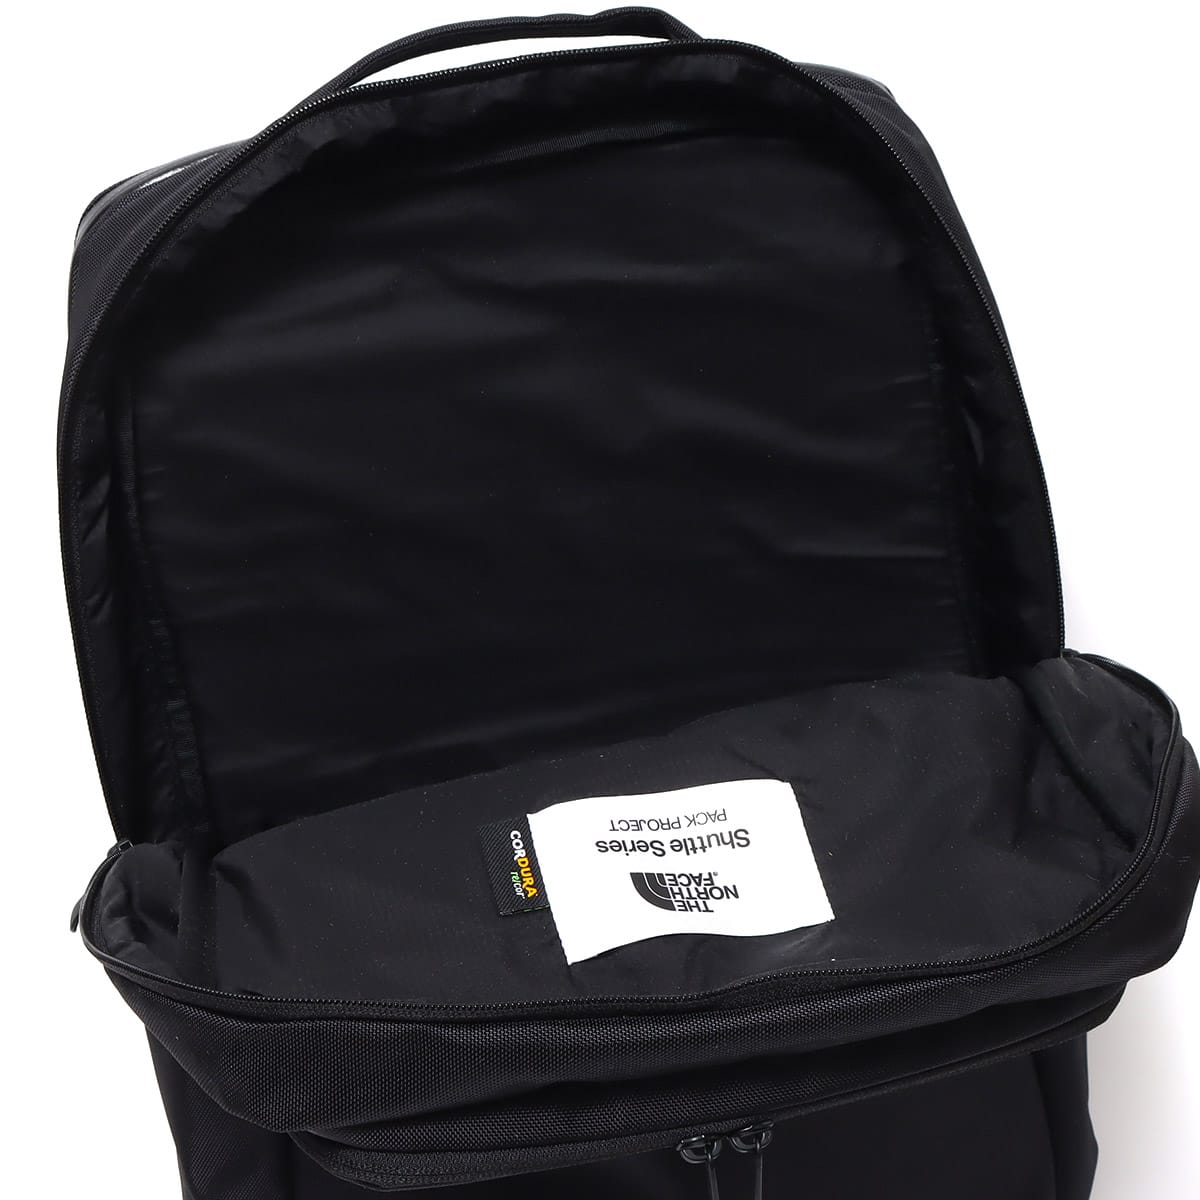 THE NORTH FACE Shuttle series BLACK